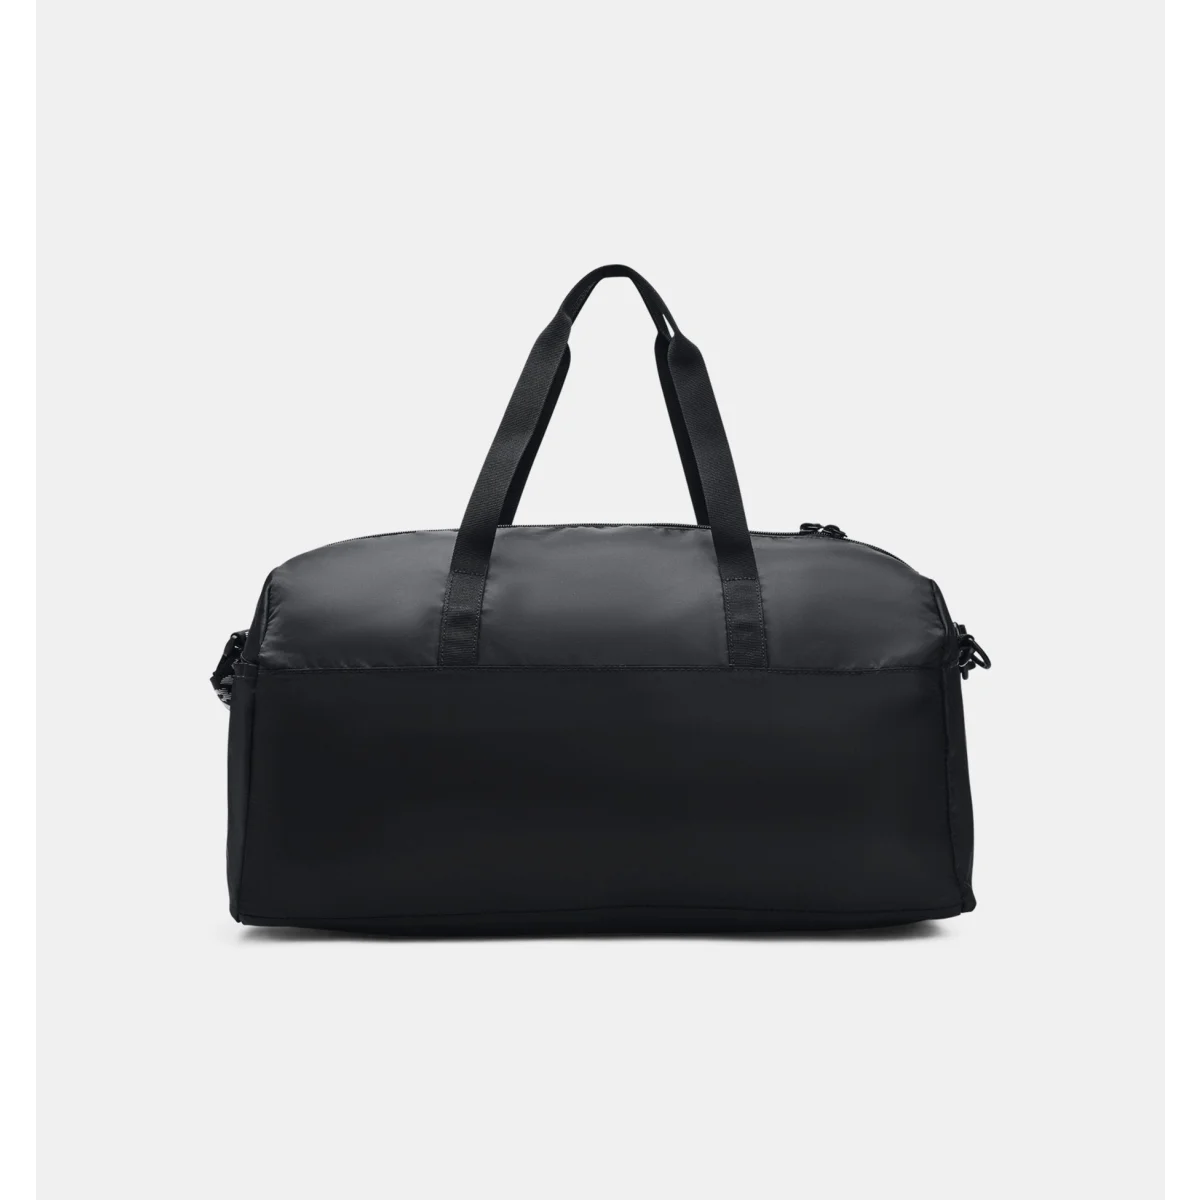 UNDER ARMMOUR Torba FAVORITE DUFFLE - 1369212-001